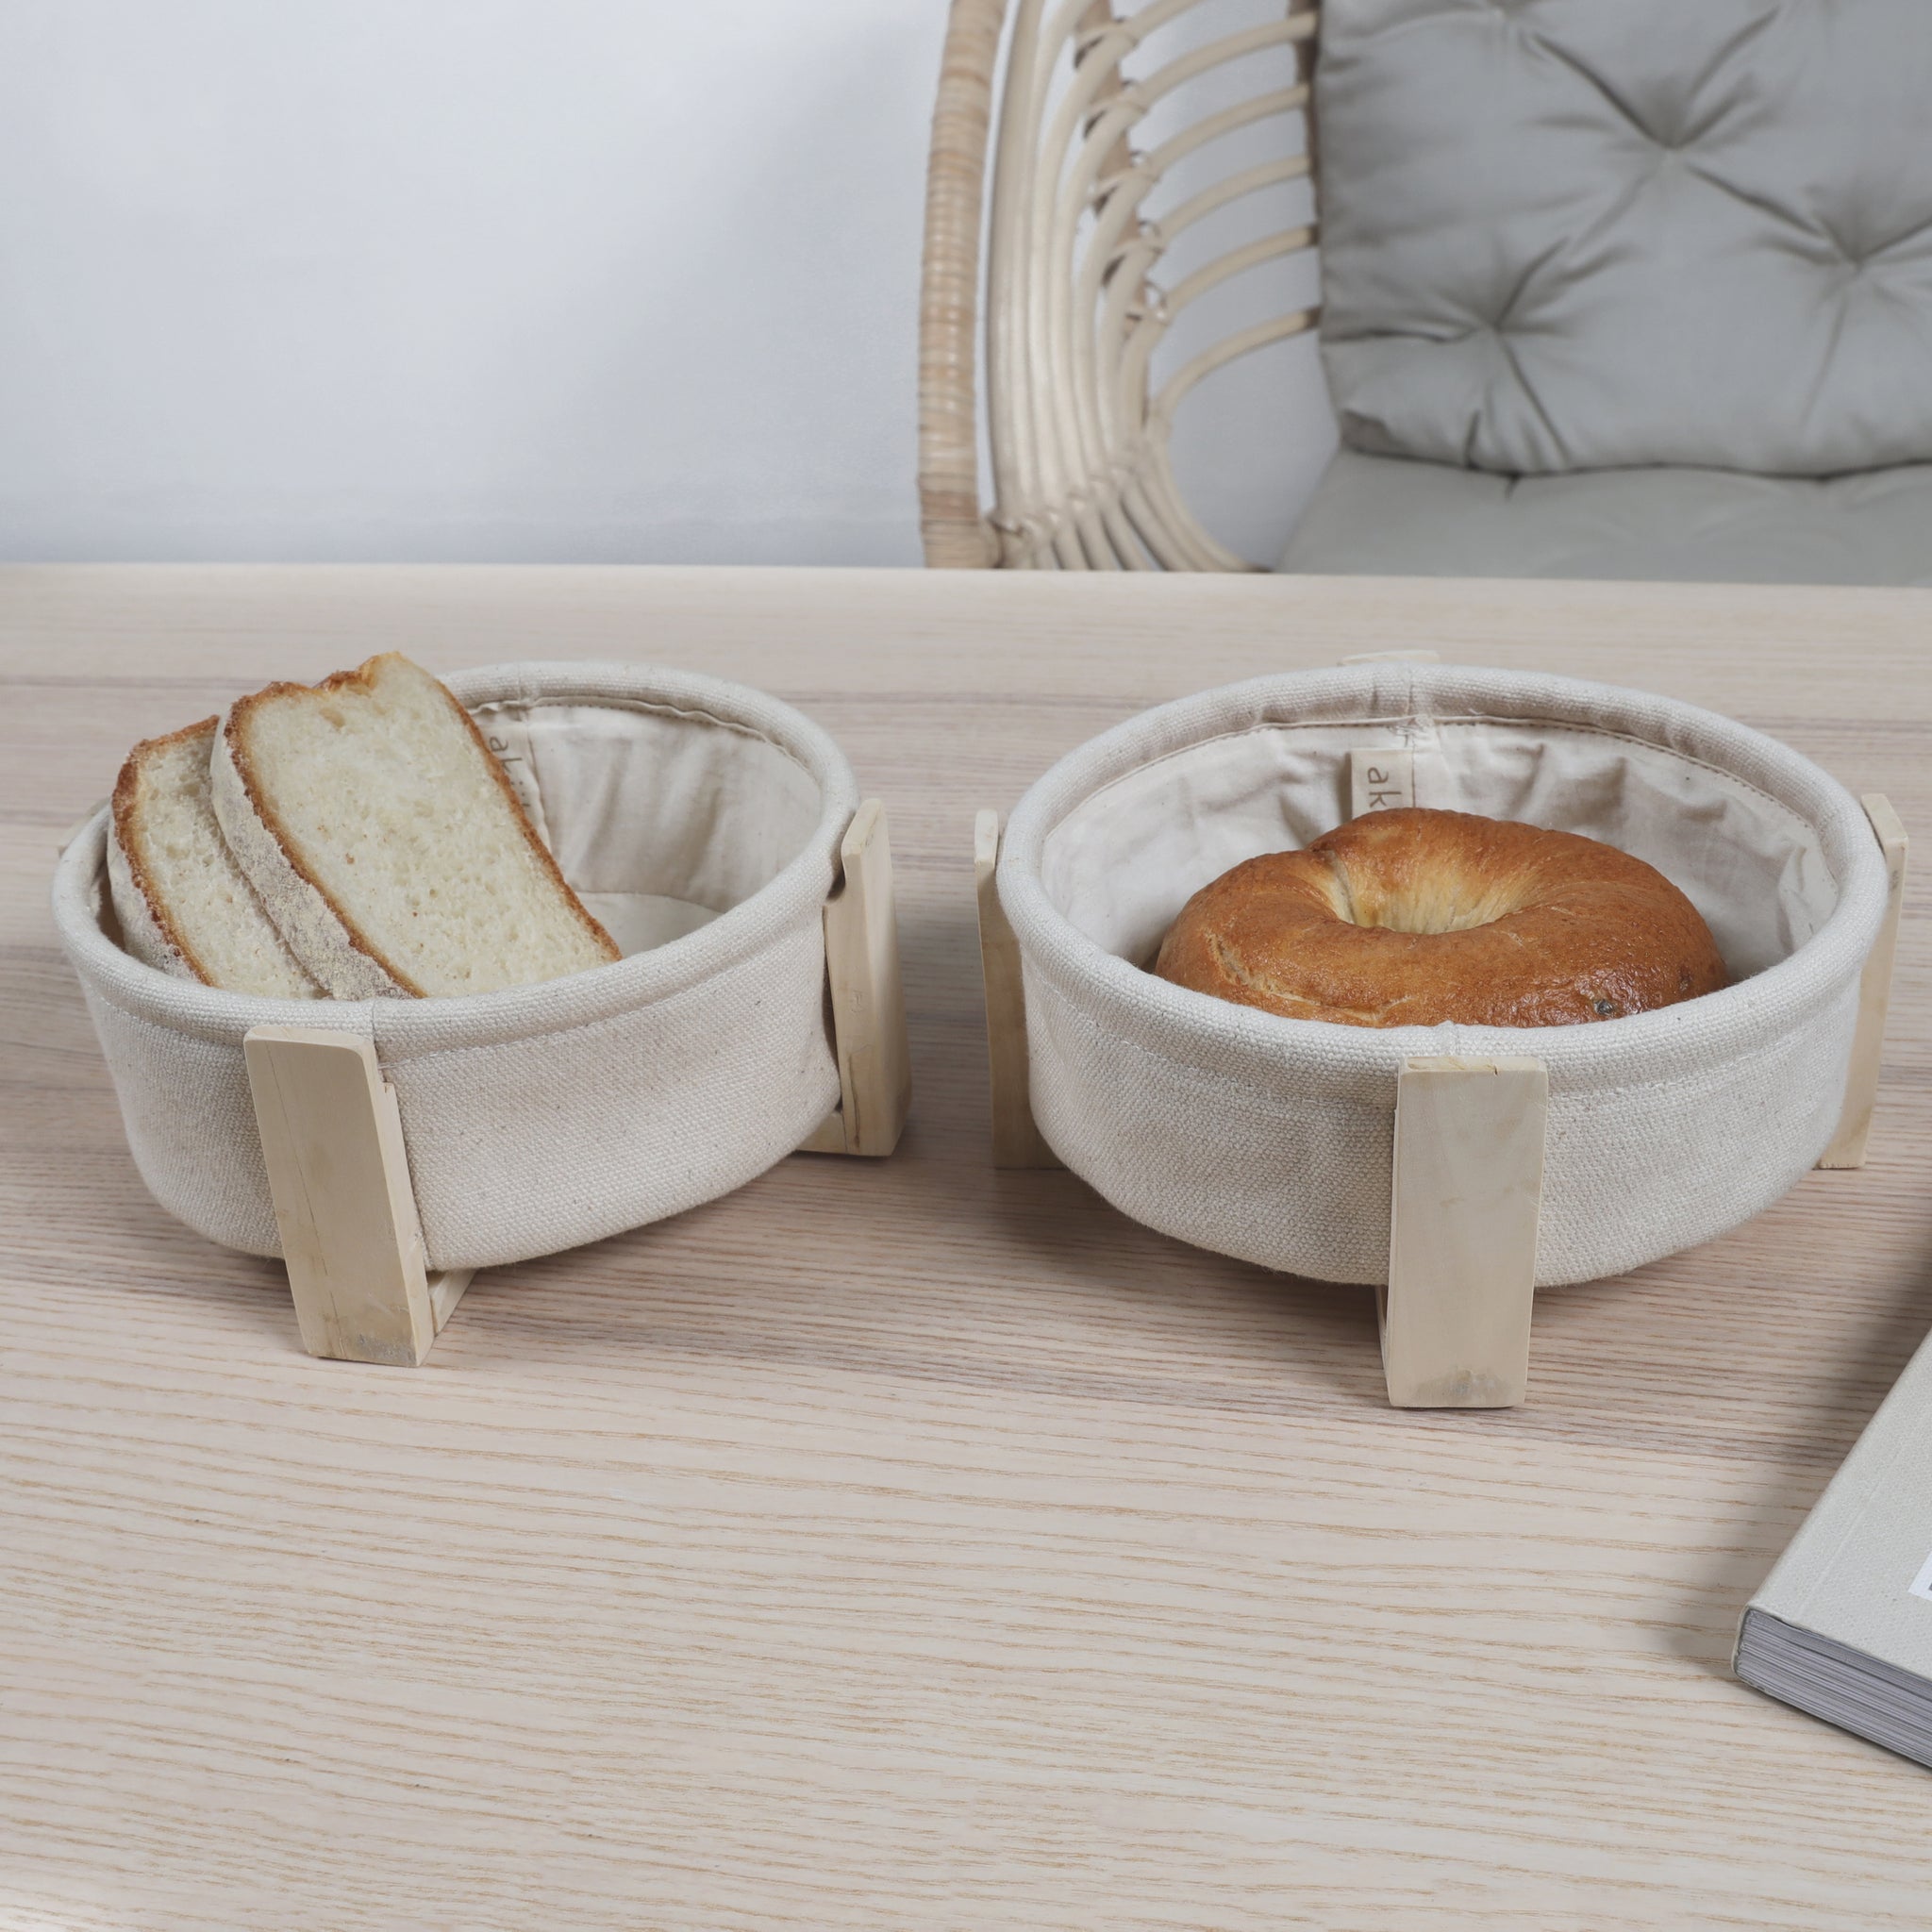 Circle Bread Basket with Wooden Stand